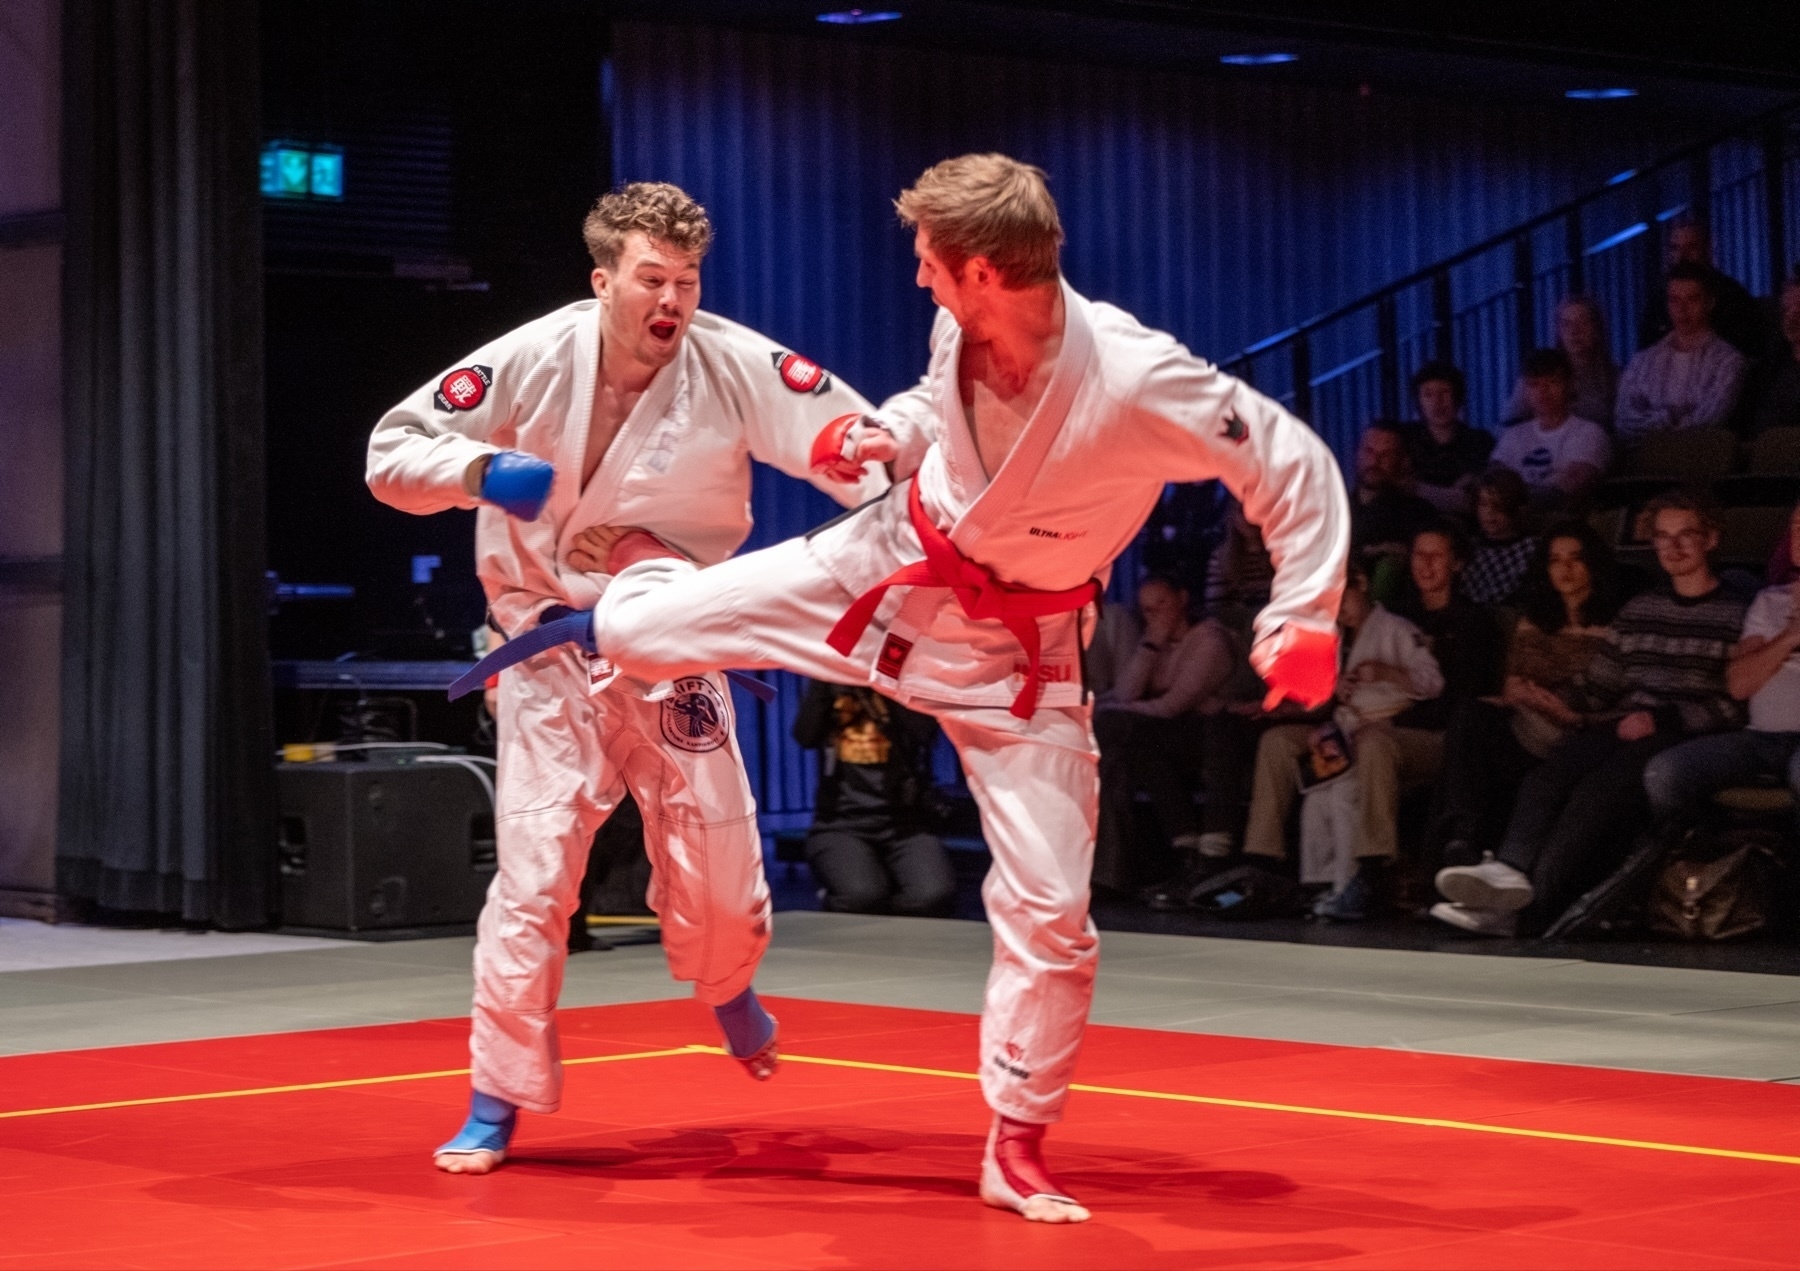 Two ju-jutsu practitioners sparring in a competition on a red mat, with one delivering a kick and the other recoiling. Spectators are visible in the background.